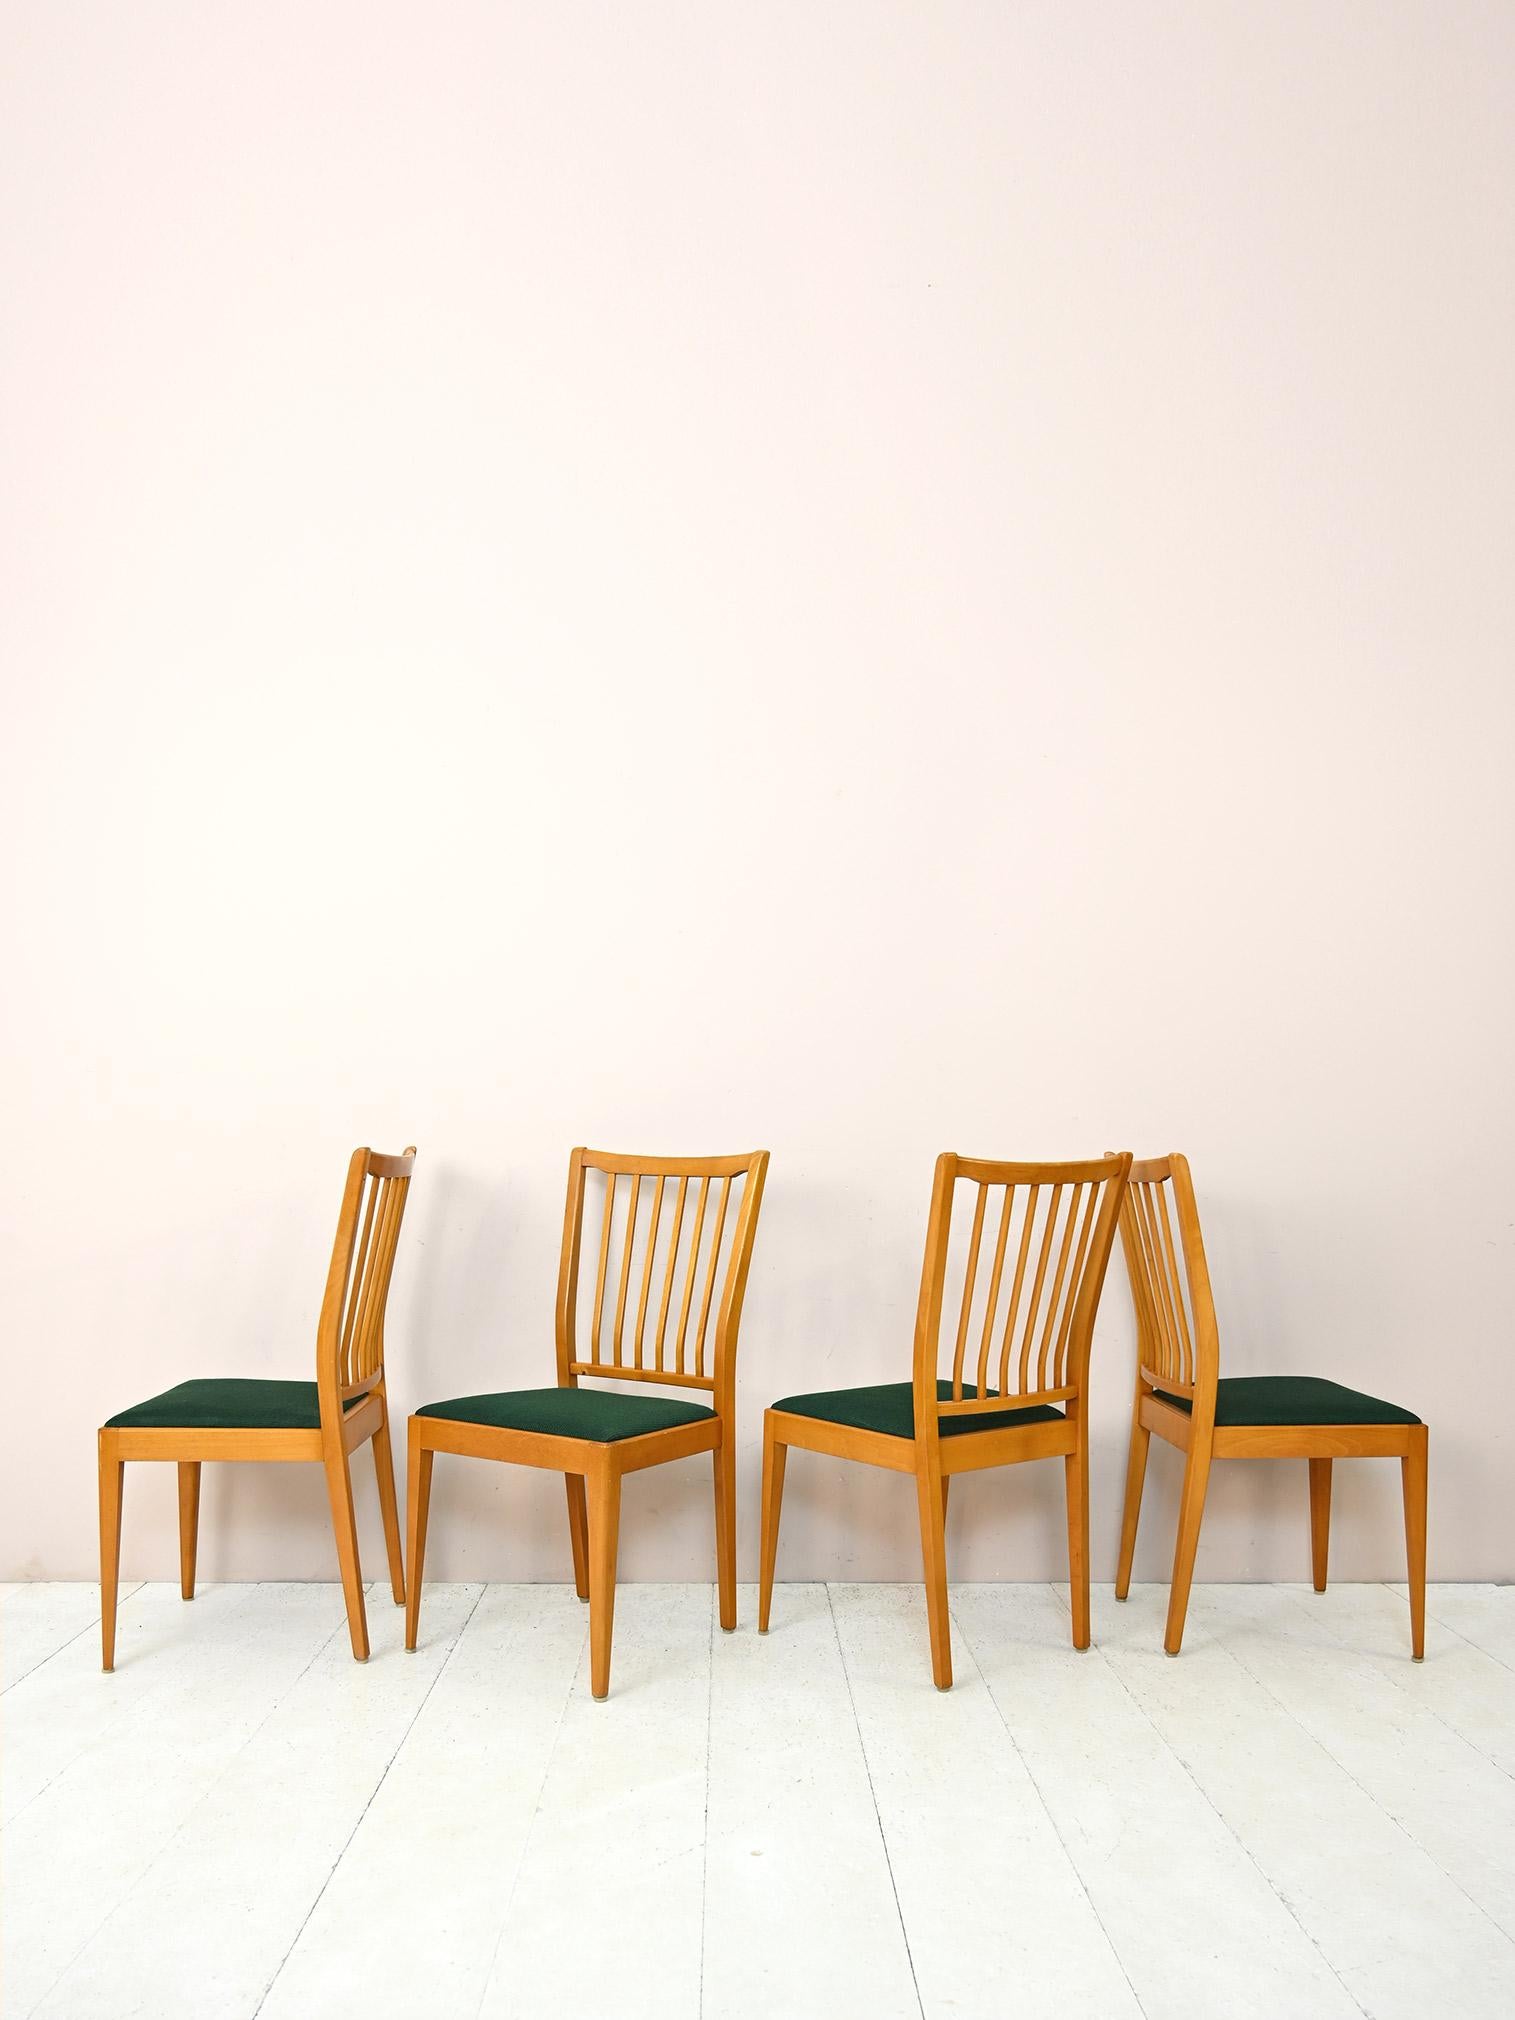 Set of 4 original vintage wooden chairs.
Retro-flavoured chairs consisting of a birch wood frame and an upholstered seat lined with original vintage green fabric.
The backrest is slightly contoured and consists of wooden stems. The legs are tapered